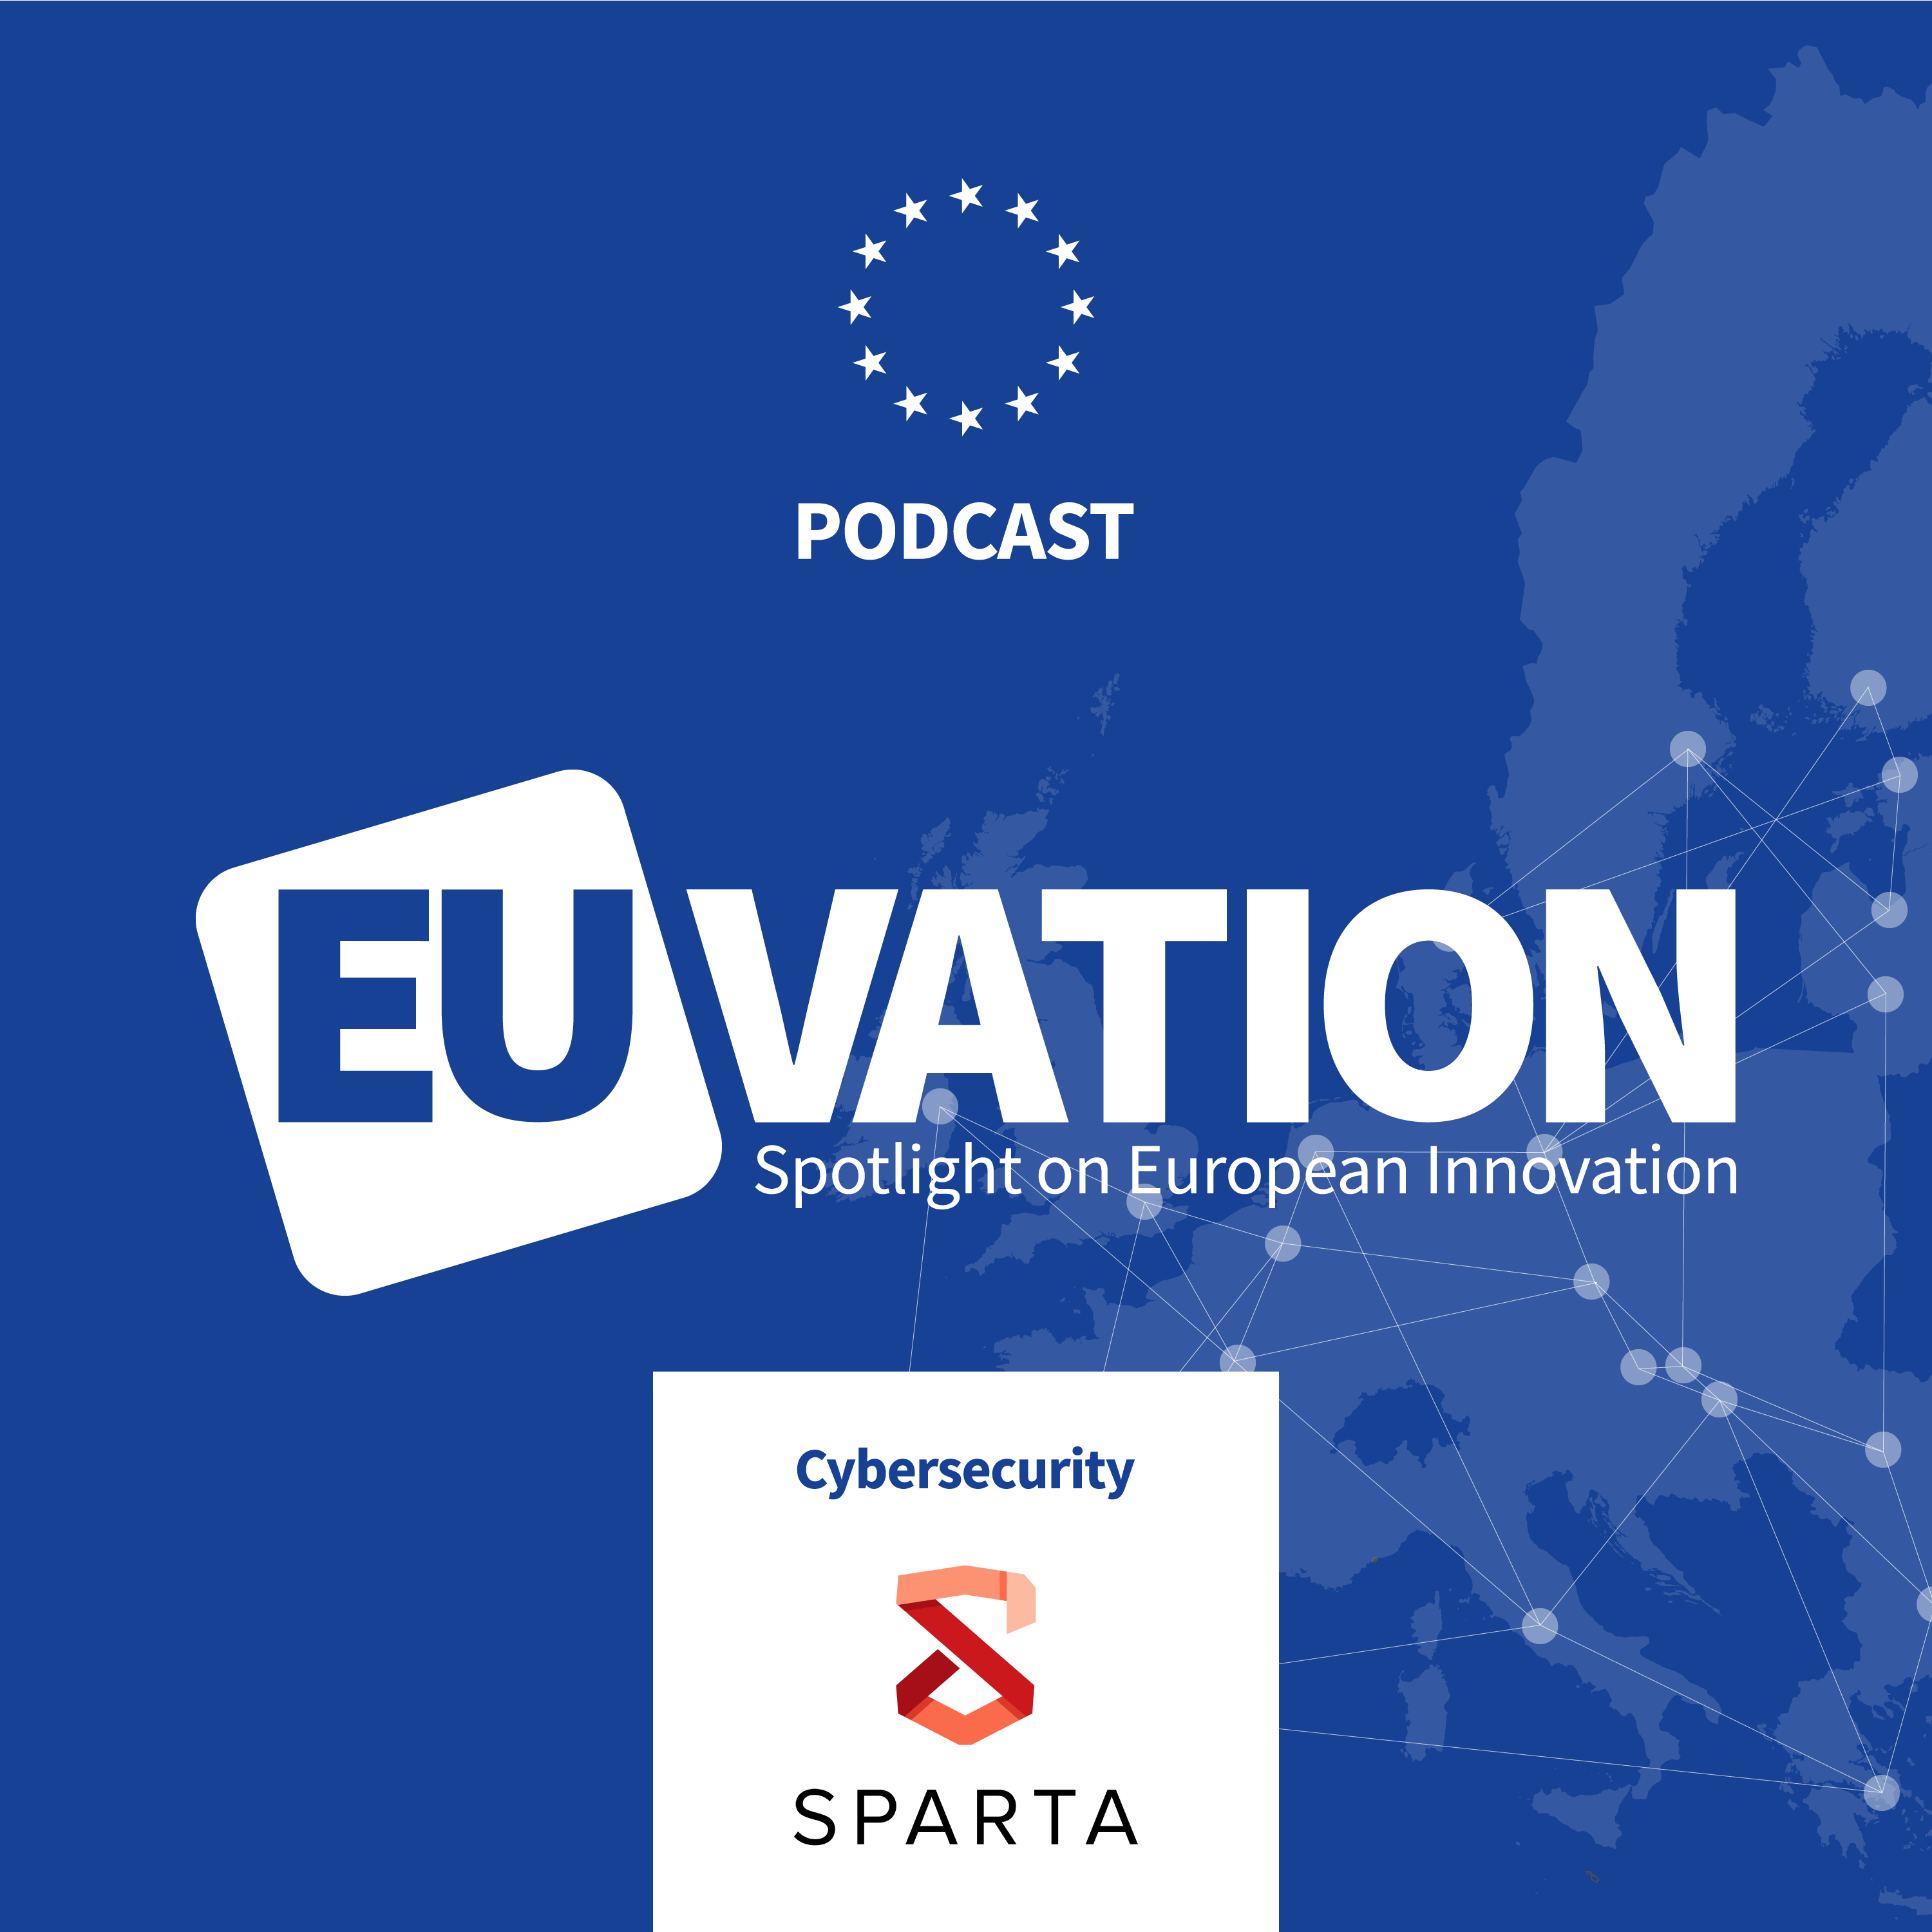 SPARTA (3) H2020 Project: Cyber Security in the EU (part three)